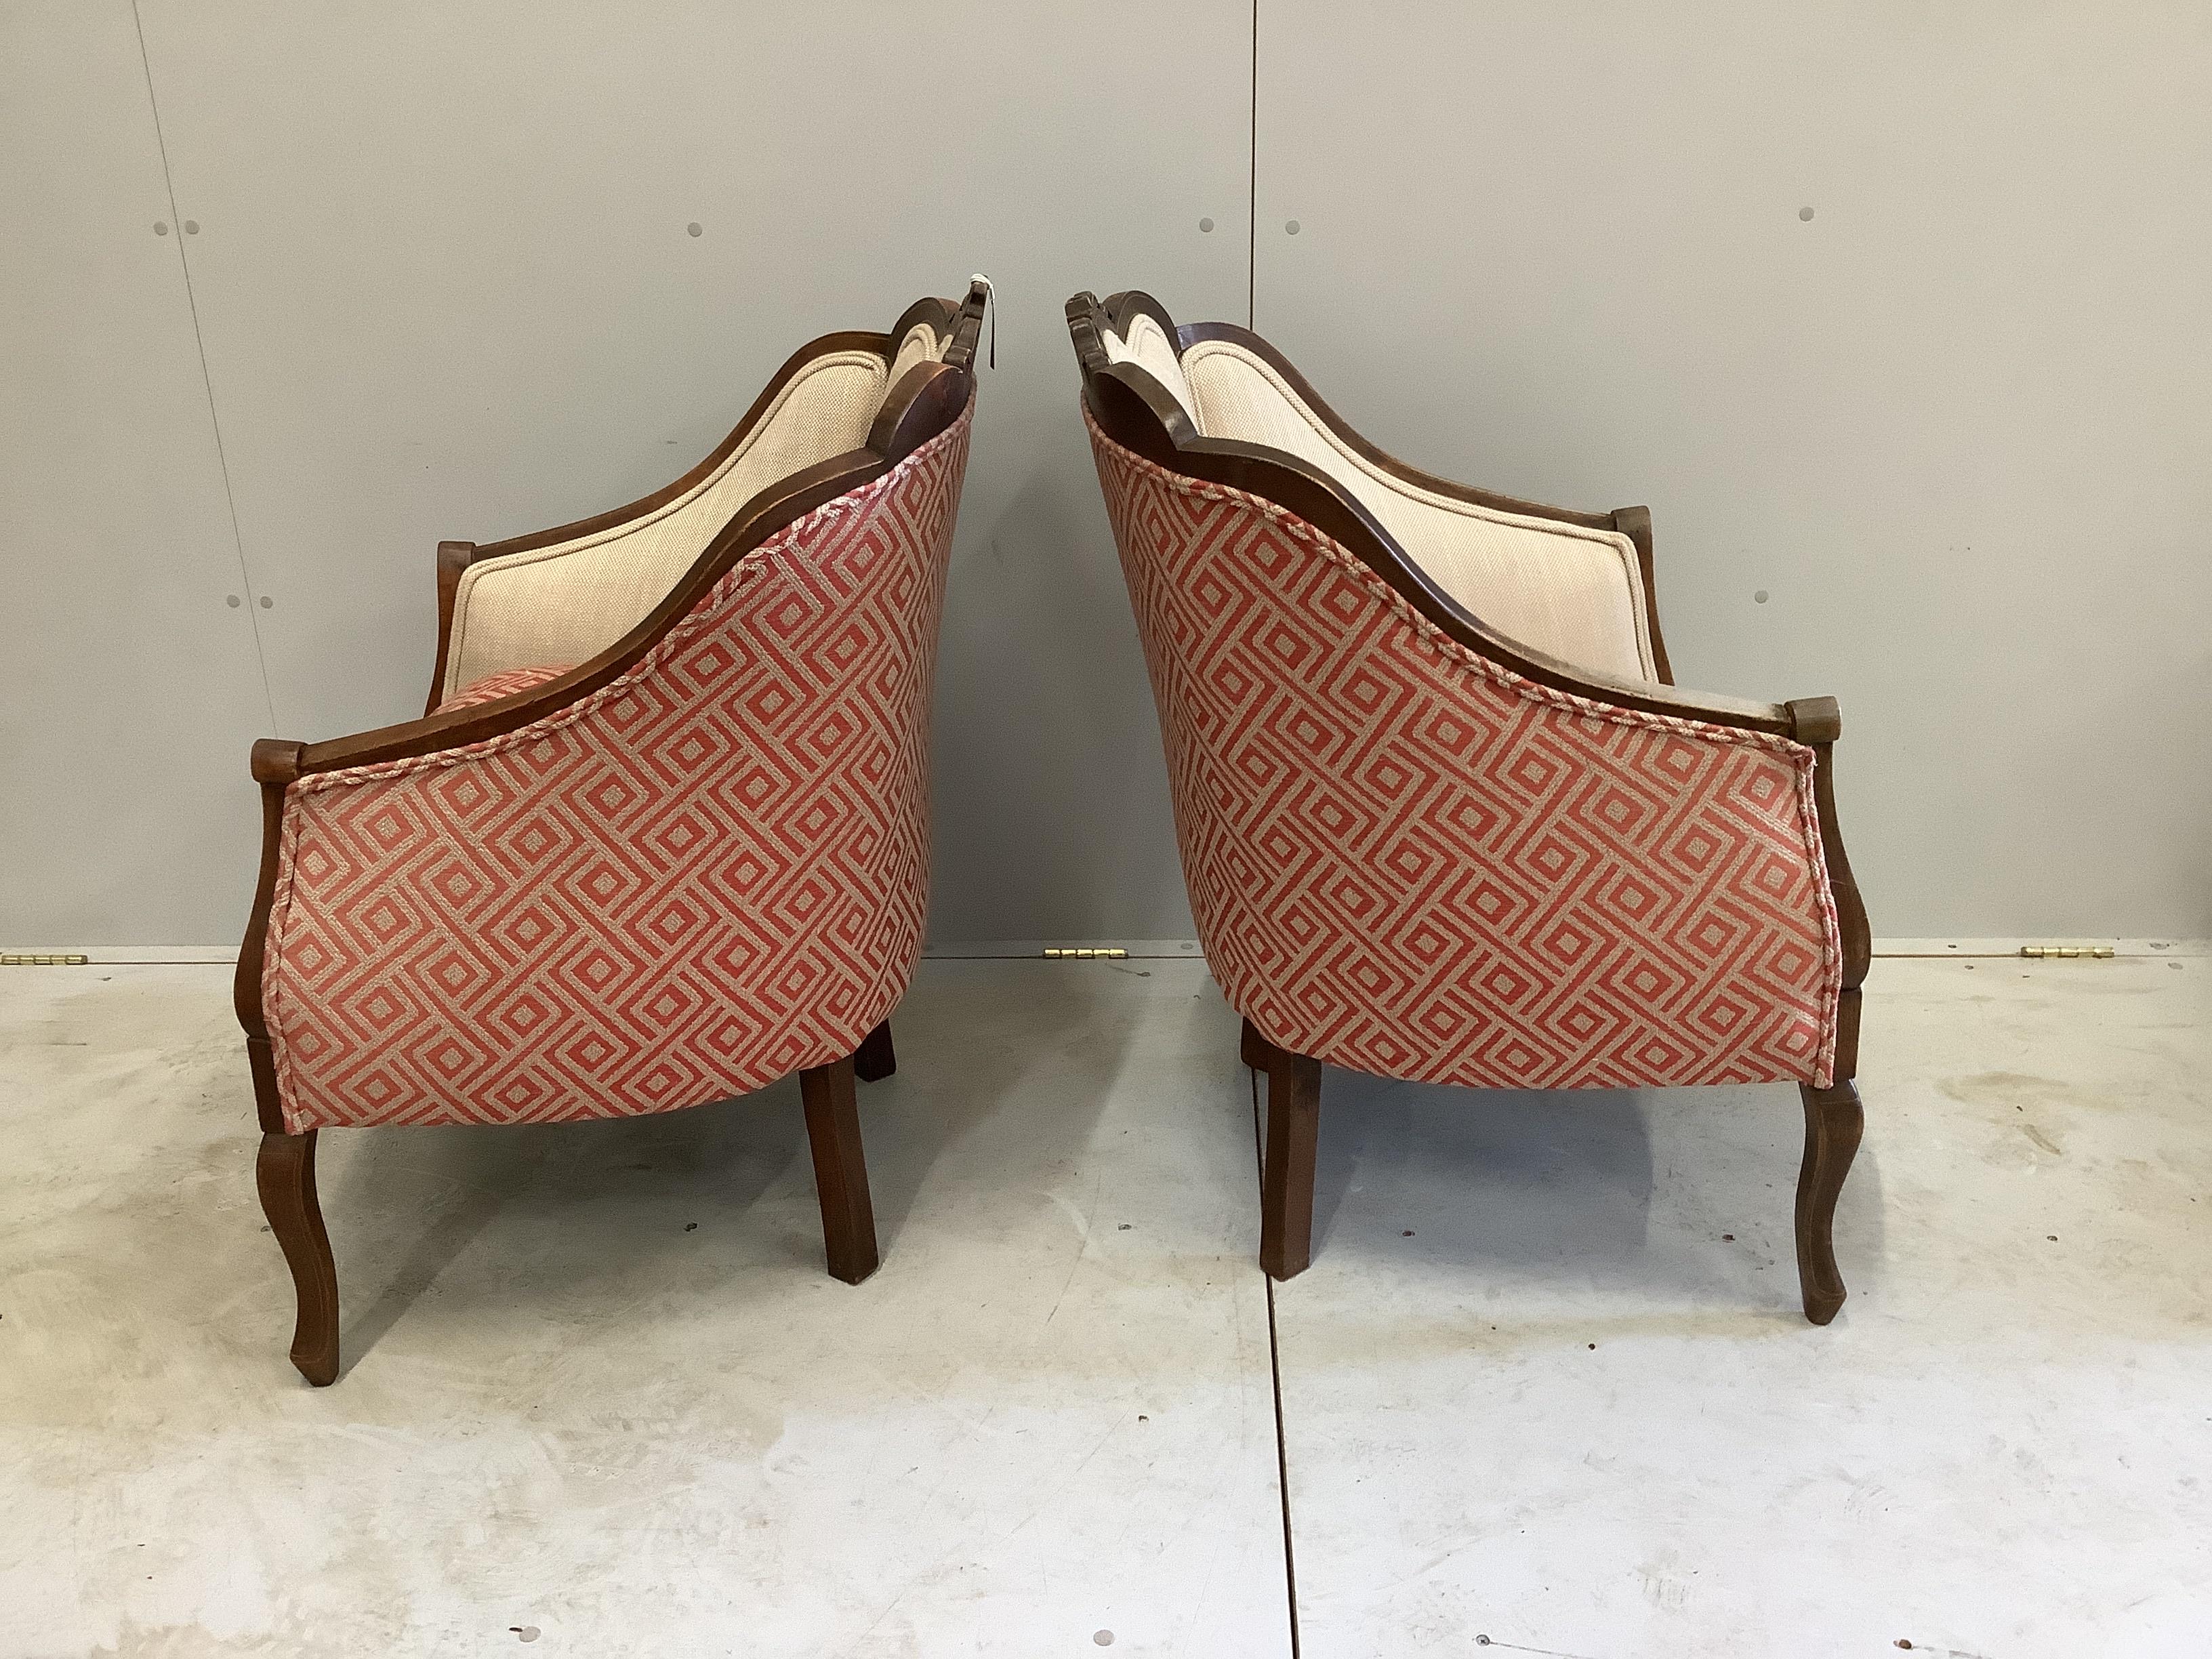 A pair of Edwardian inlaid mahogany upholstered armchairs, width 65cm, depth 66cm, height 90cm